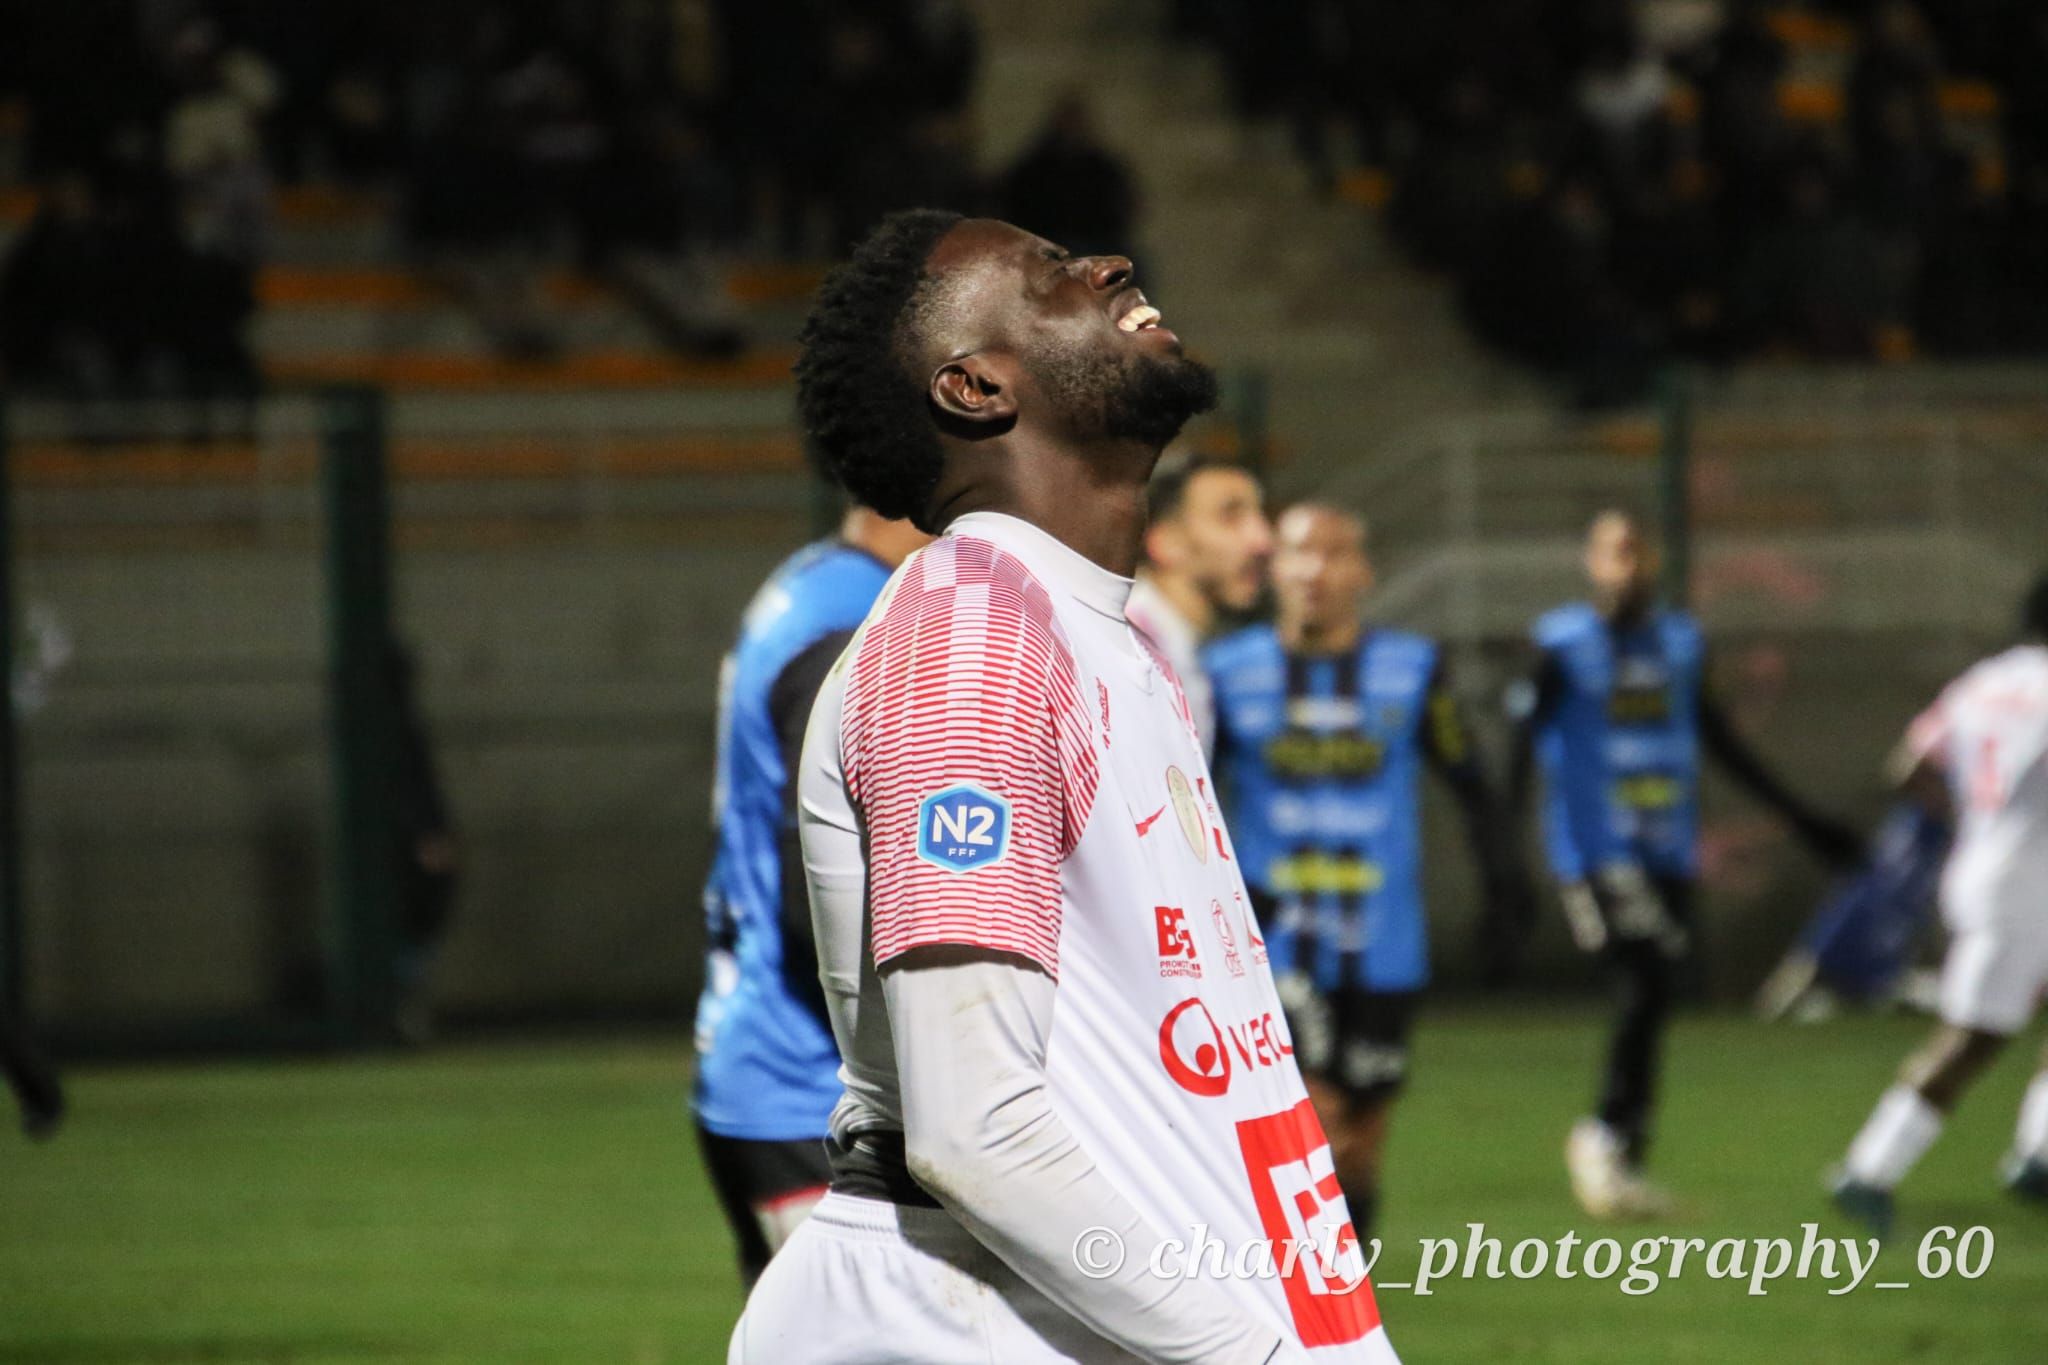 #N2 Le Derby pour Chambly